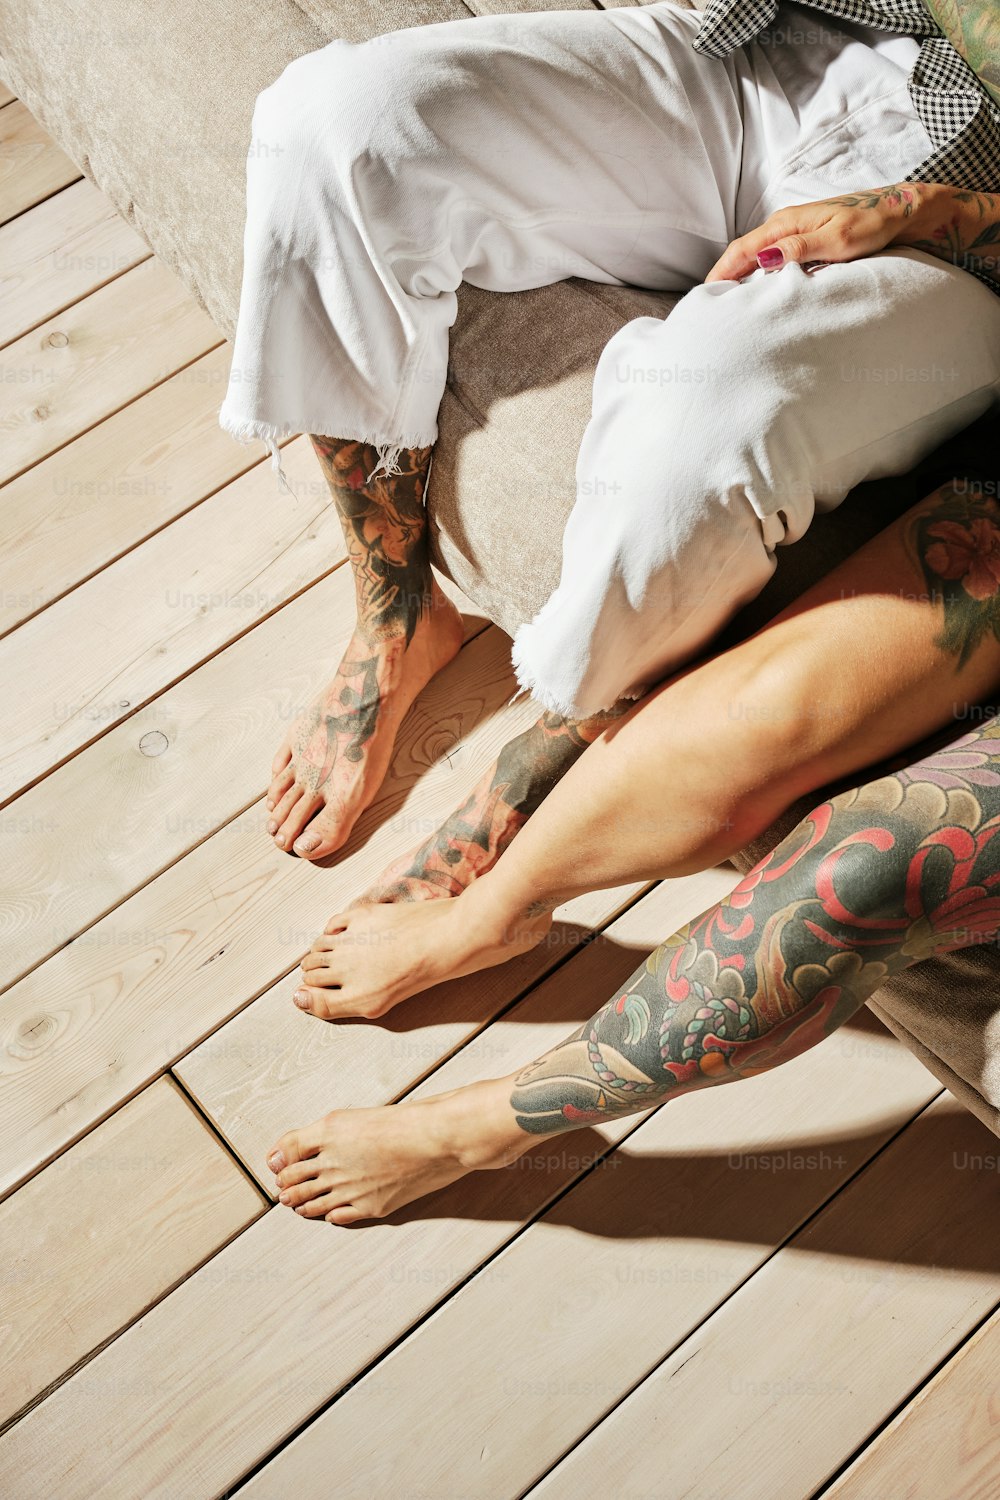 a man with tattoos sitting on a wooden floor